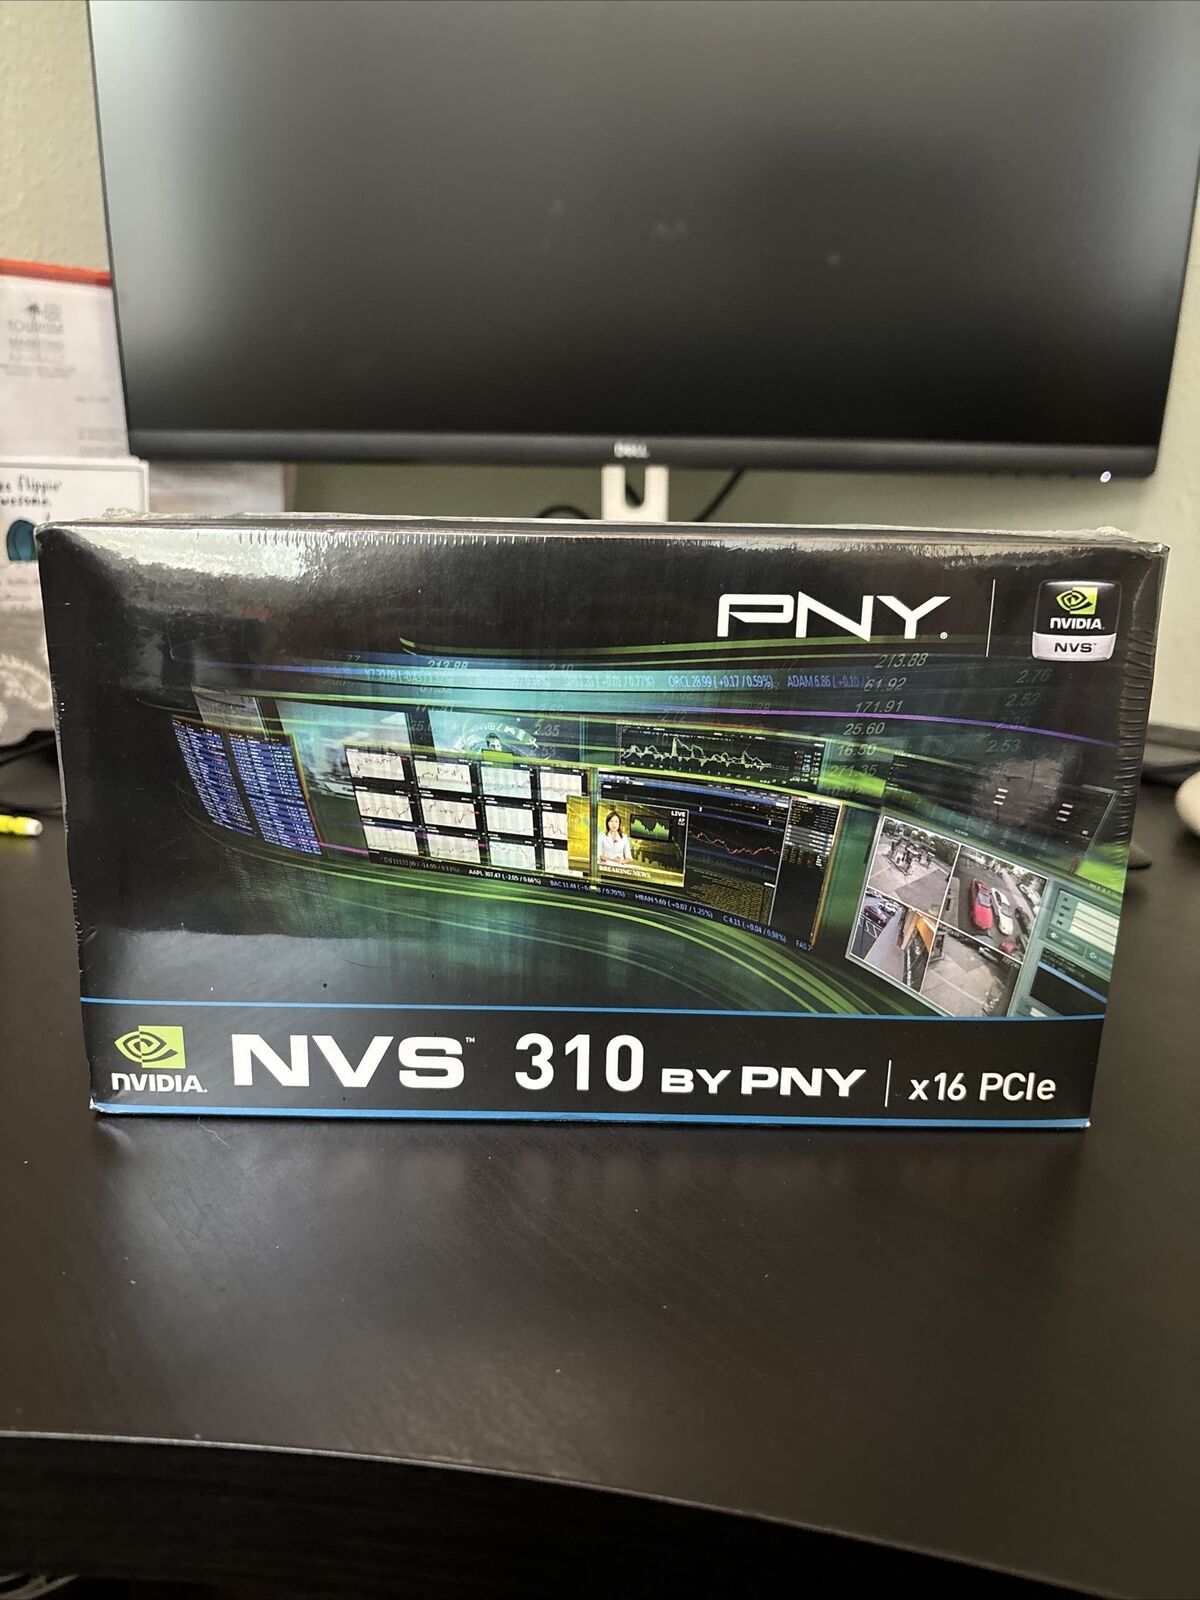 Nvidia NVS 310 By PNY, X16 PCIe, Brand New Graphic Card In Sealed Box